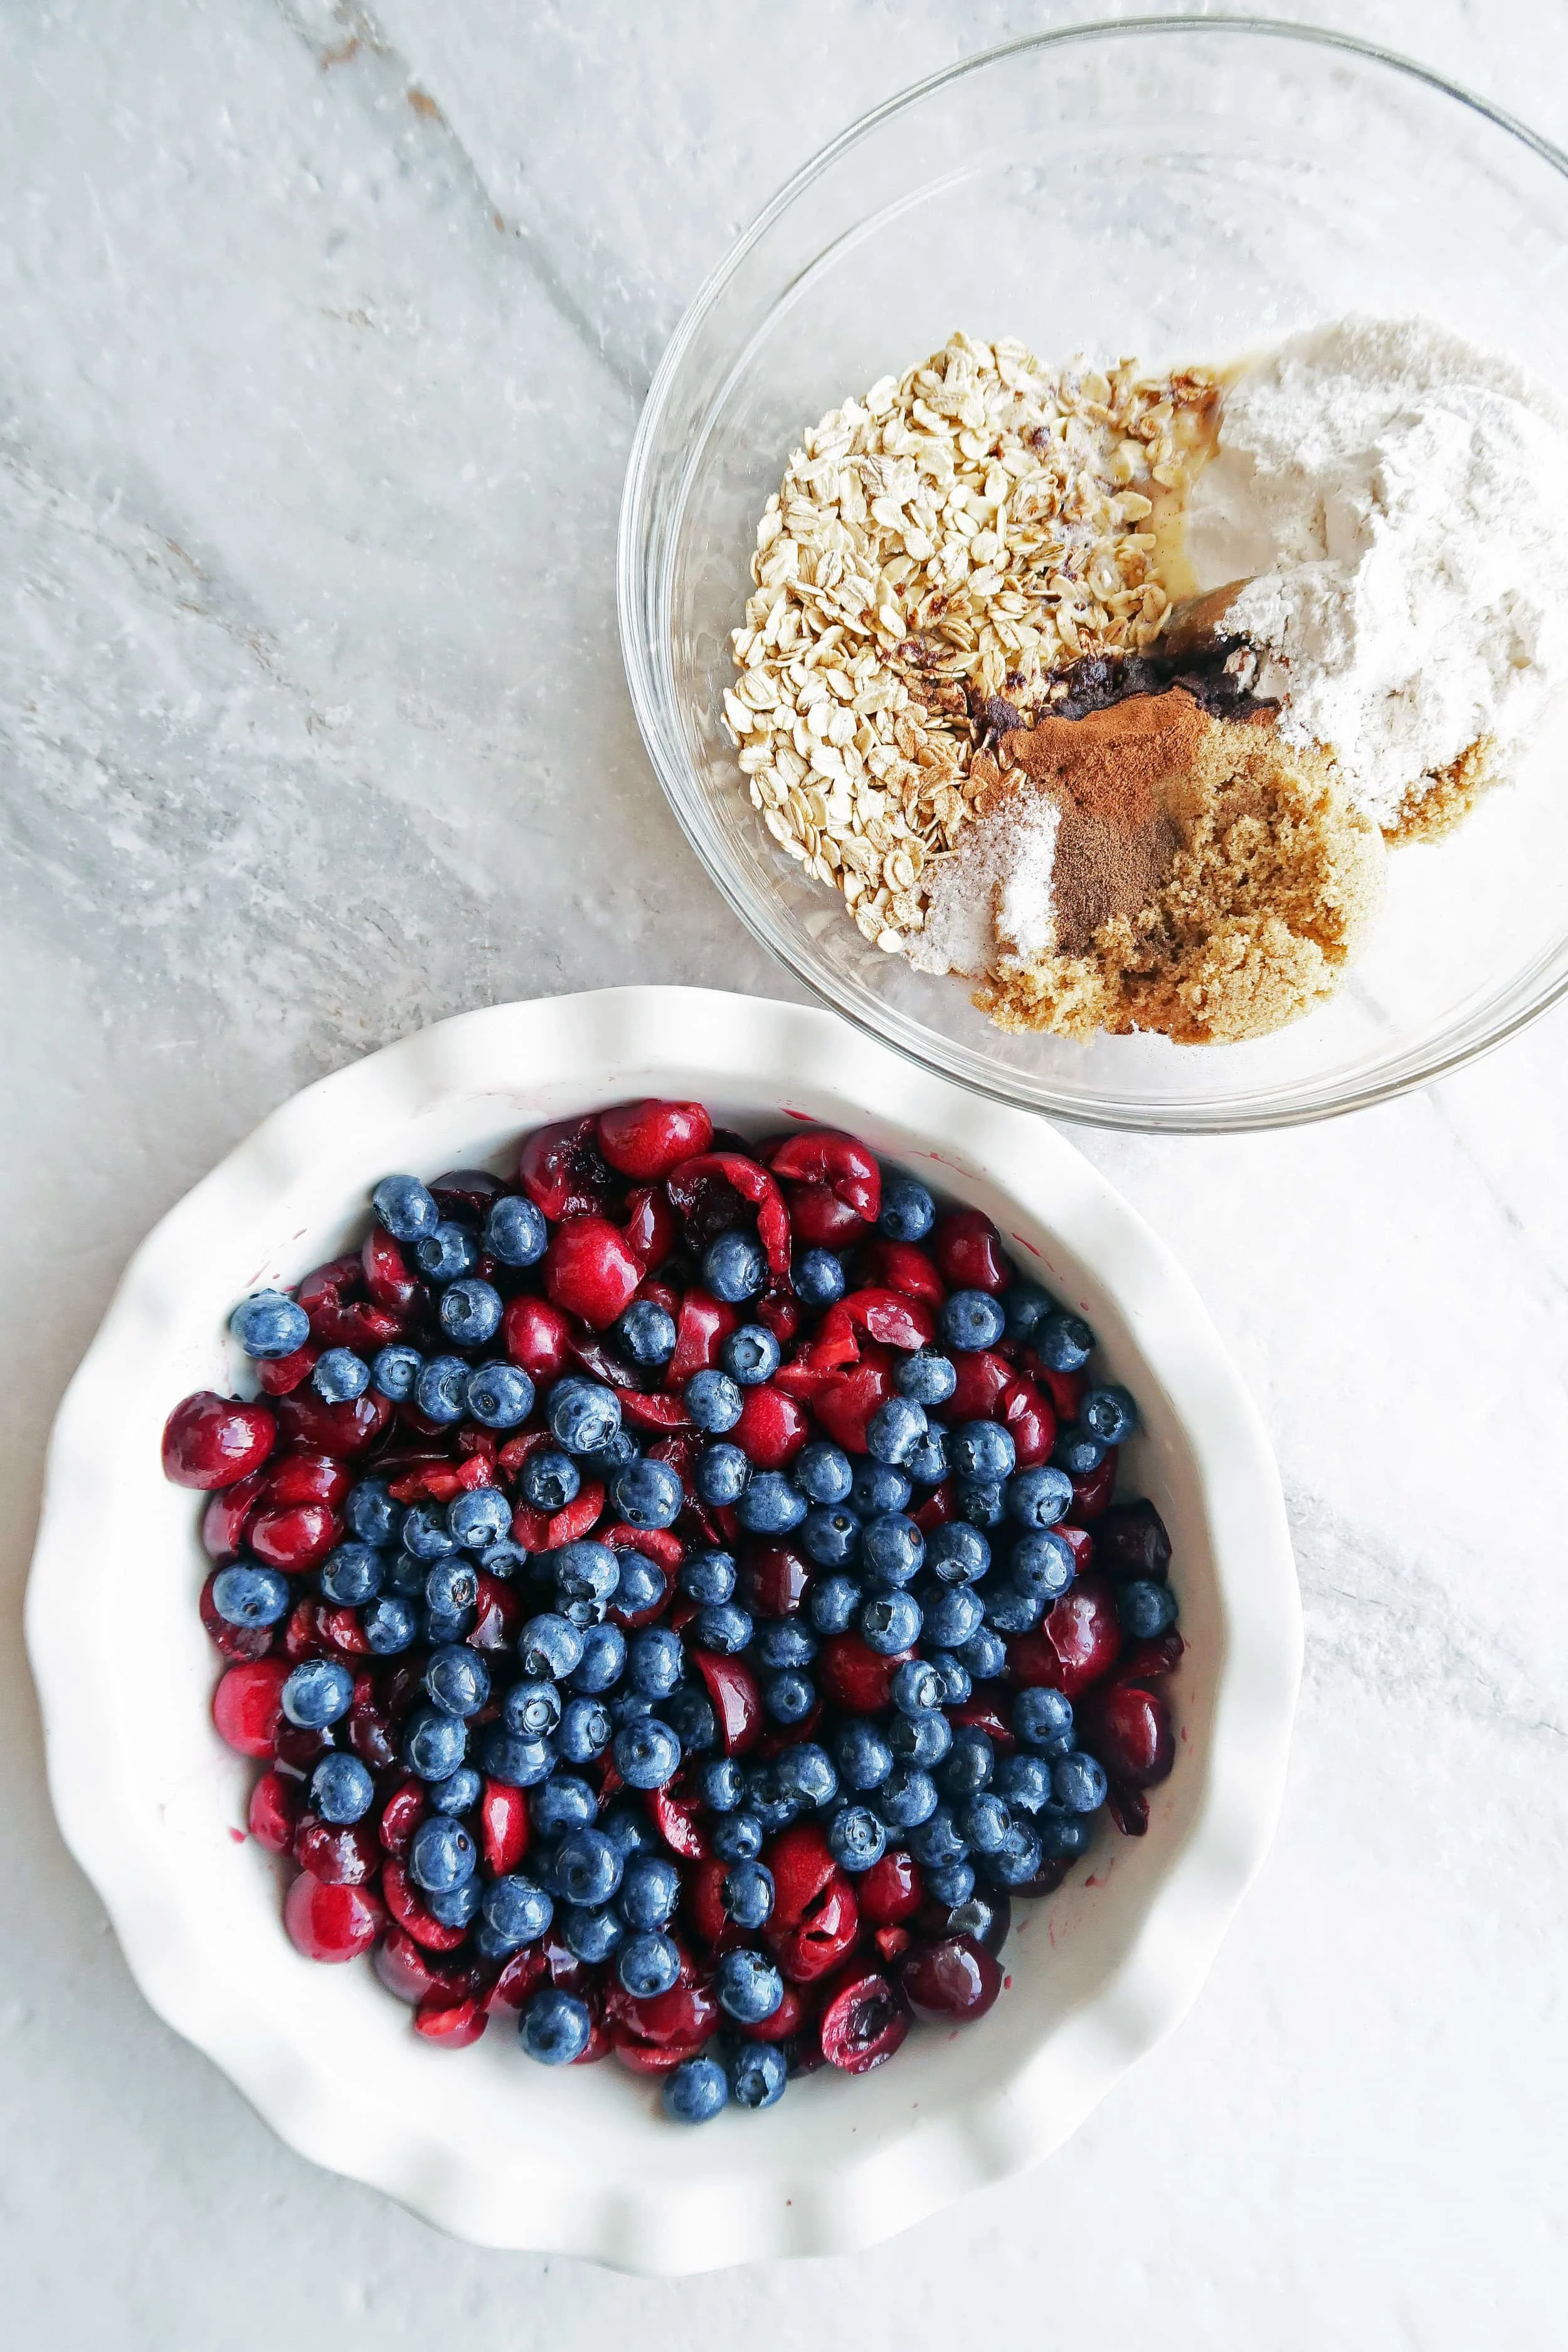 Pitted cherries and blueberries in a pie dish and oats, sugar, flour, and spices in another bowl.